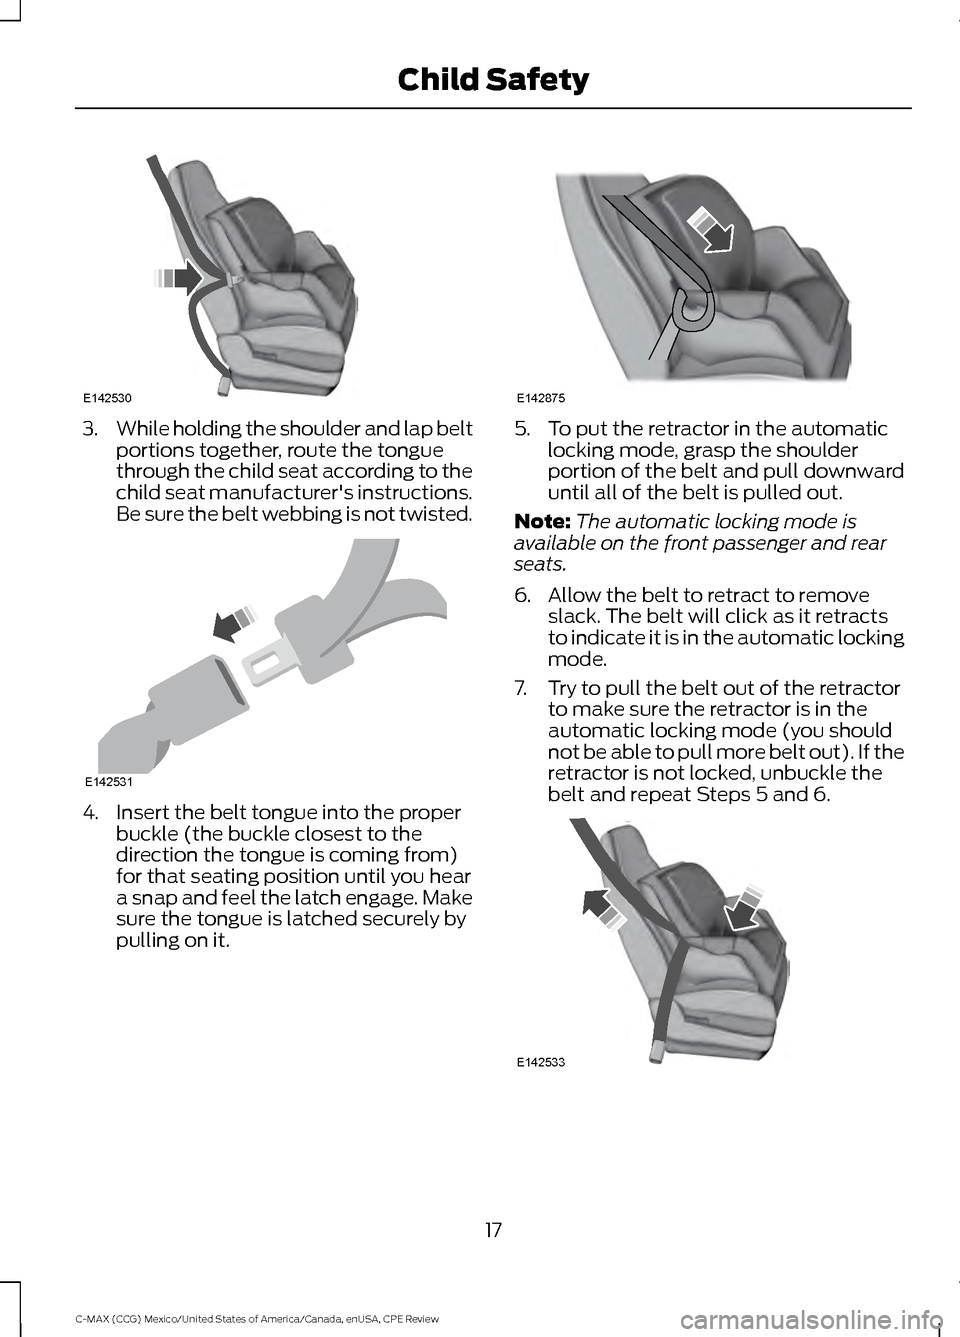 FORD C MAX HYBRID 2015 2.G User Guide 3.
While holding the shoulder and lap belt
portions together, route the tongue
through the child seat according to the
child seat manufacturers instructions.
Be sure the belt webbing is not twisted. 